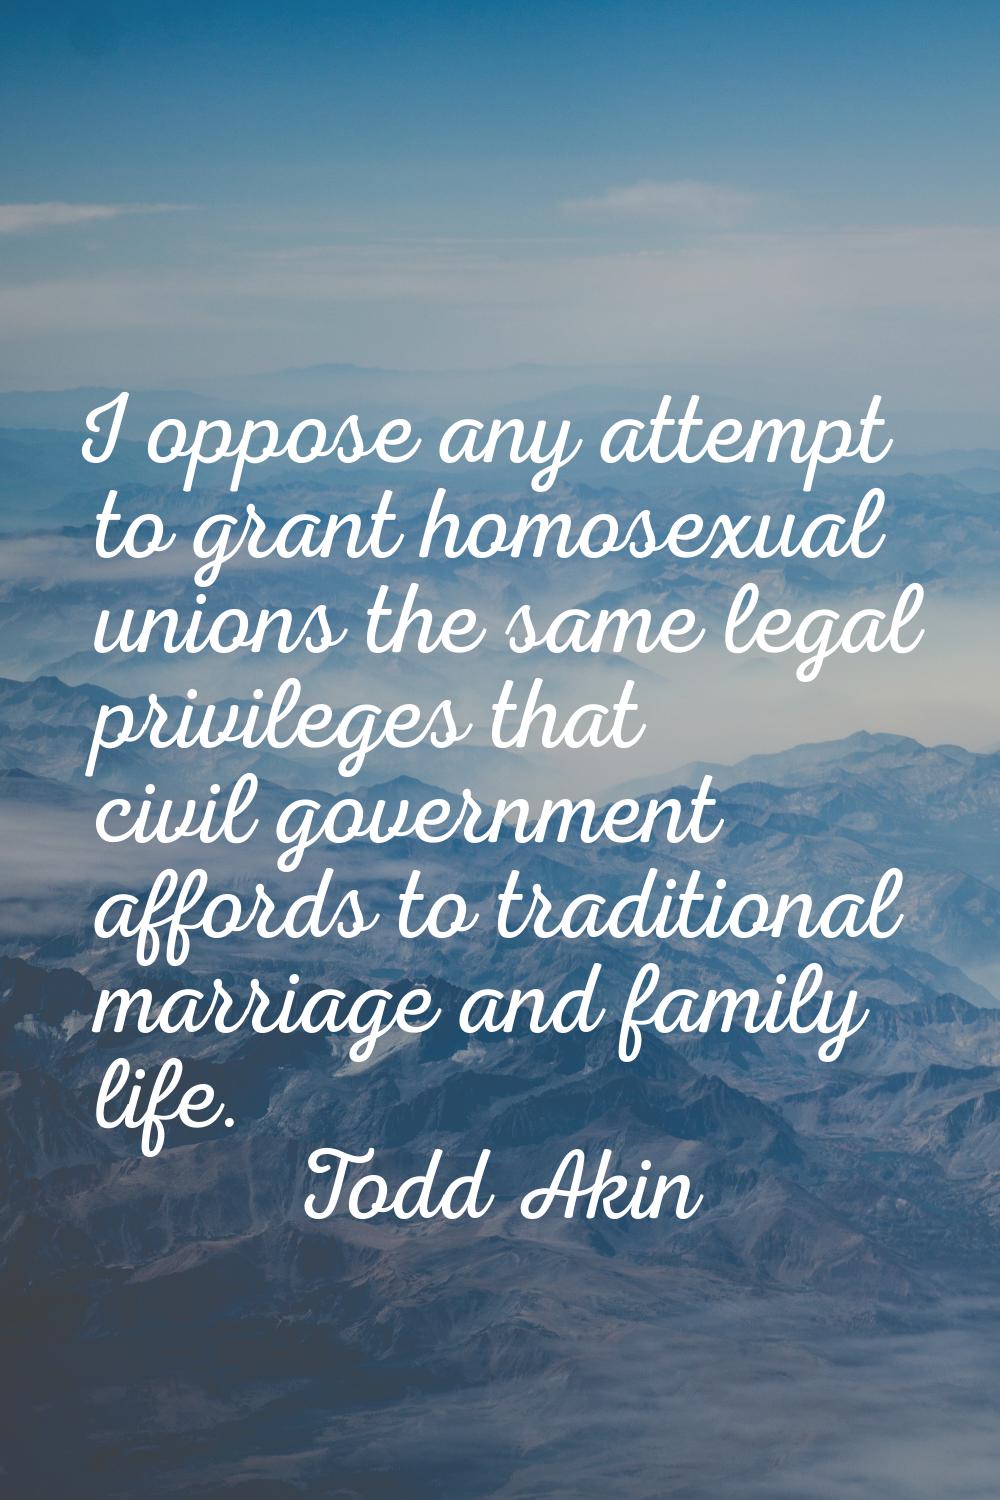 I oppose any attempt to grant homosexual unions the same legal privileges that civil government aff